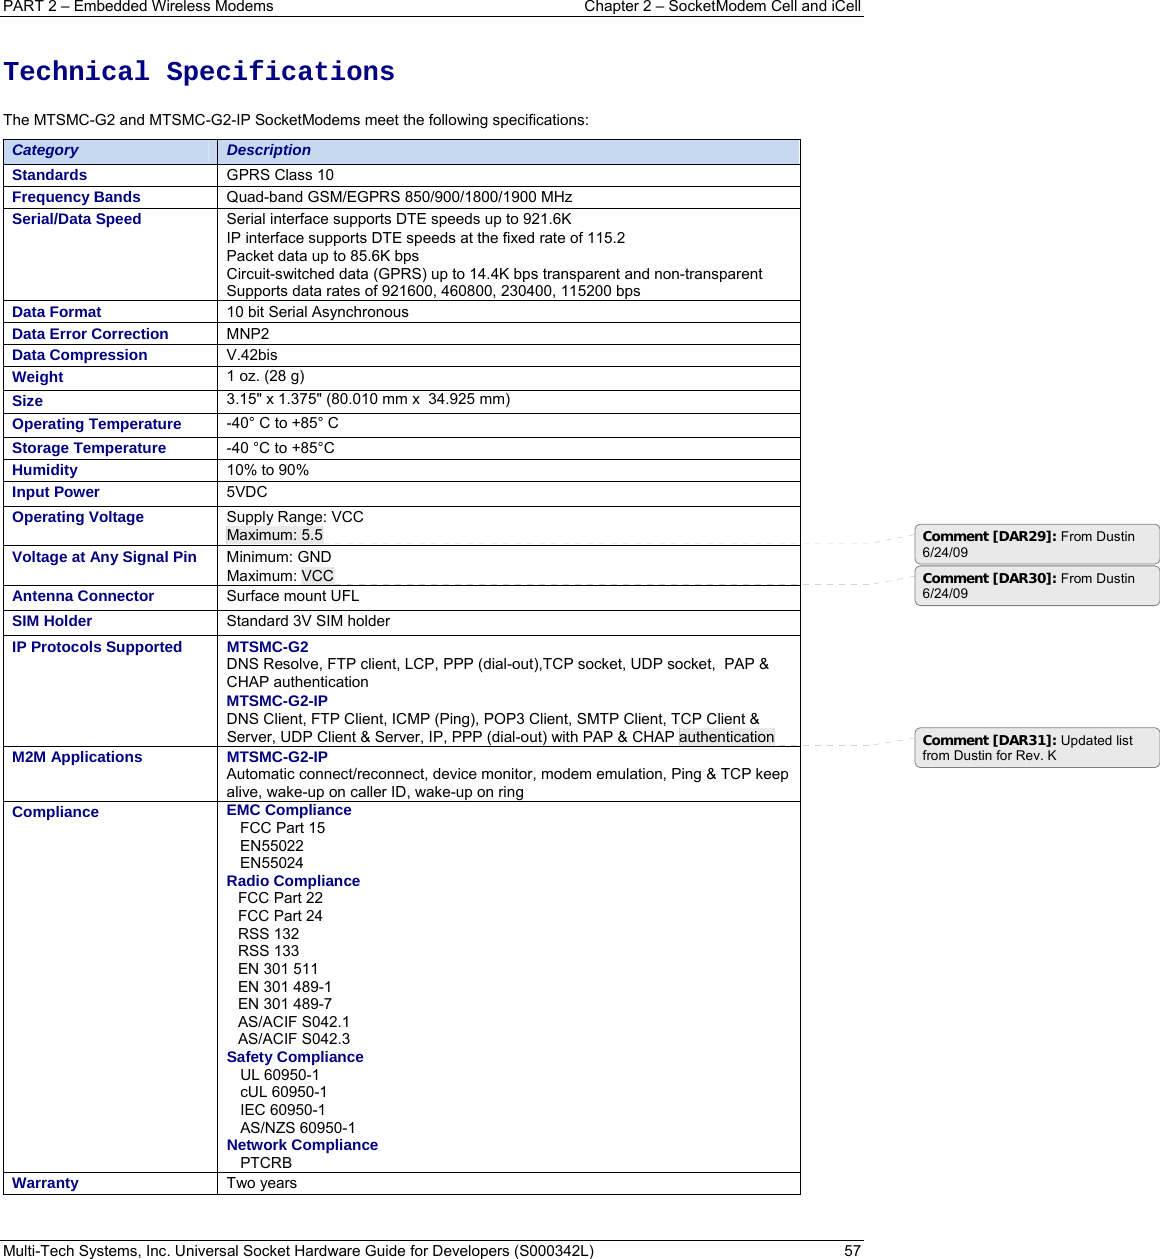 PART 2 – Embedded Wireless Modems   Chapter 2 – SocketModem Cell and iCell Multi-Tech Systems, Inc. Universal Socket Hardware Guide for Developers (S000342L)  57   Technical Specifications  The MTSMC-G2 and MTSMC-G2-IP SocketModems meet the following specifications:  Category  Description Standards  GPRS Class 10 Frequency Bands  Quad-band GSM/EGPRS 850/900/1800/1900 MHz  Serial/Data Speed  Serial interface supports DTE speeds up to 921.6K IP interface supports DTE speeds at the fixed rate of 115.2  Packet data up to 85.6K bps Circuit-switched data (GPRS) up to 14.4K bps transparent and non-transparent Supports data rates of 921600, 460800, 230400, 115200 bps Data Format  10 bit Serial Asynchronous Data Error Correction  MNP2 Data Compression  V.42bis Weight  1 oz. (28 g)   Size  3.15&quot; x 1.375&quot; (80.010 mm x  34.925 mm) Operating Temperature  -40° C to +85° C  Storage Temperature  -40 °C to +85°C  Humidity  10% to 90%  Input Power   5VDC   Operating Voltage  Supply Range: VCC Maximum: 5.5 Voltage at Any Signal Pin  Minimum: GND Maximum: VCC Antenna Connector  Surface mount UFL  SIM Holder  Standard 3V SIM holder IP Protocols Supported  MTSMC-G2 DNS Resolve, FTP client, LCP, PPP (dial-out),TCP socket, UDP socket,  PAP &amp; CHAP authentication MTSMC-G2-IP DNS Client, FTP Client, ICMP (Ping), POP3 Client, SMTP Client, TCP Client &amp; Server, UDP Client &amp; Server, IP, PPP (dial-out) with PAP &amp; CHAP authentication M2M Applications   MTSMC-G2-IP Automatic connect/reconnect, device monitor, modem emulation, Ping &amp; TCP keep alive, wake-up on caller ID, wake-up on ring Compliance  EMC Compliance     FCC Part 15     EN55022    EN55024 Radio Compliance    FCC Part 22 FCC Part 24 RSS 132 RSS 133 EN 301 511 EN 301 489-1 EN 301 489-7 AS/ACIF S042.1 AS/ACIF S042.3    Safety Compliance    UL 60950-1     cUL 60950-1     IEC 60950-1     AS/NZS 60950-1     Network Compliance PTCRB Warranty  Two years Comment [DAR29]: From Dustin 6/24/09Comment [DAR30]: From Dustin 6/24/09 Comment [DAR31]: Updated list from Dustin for Rev. K 